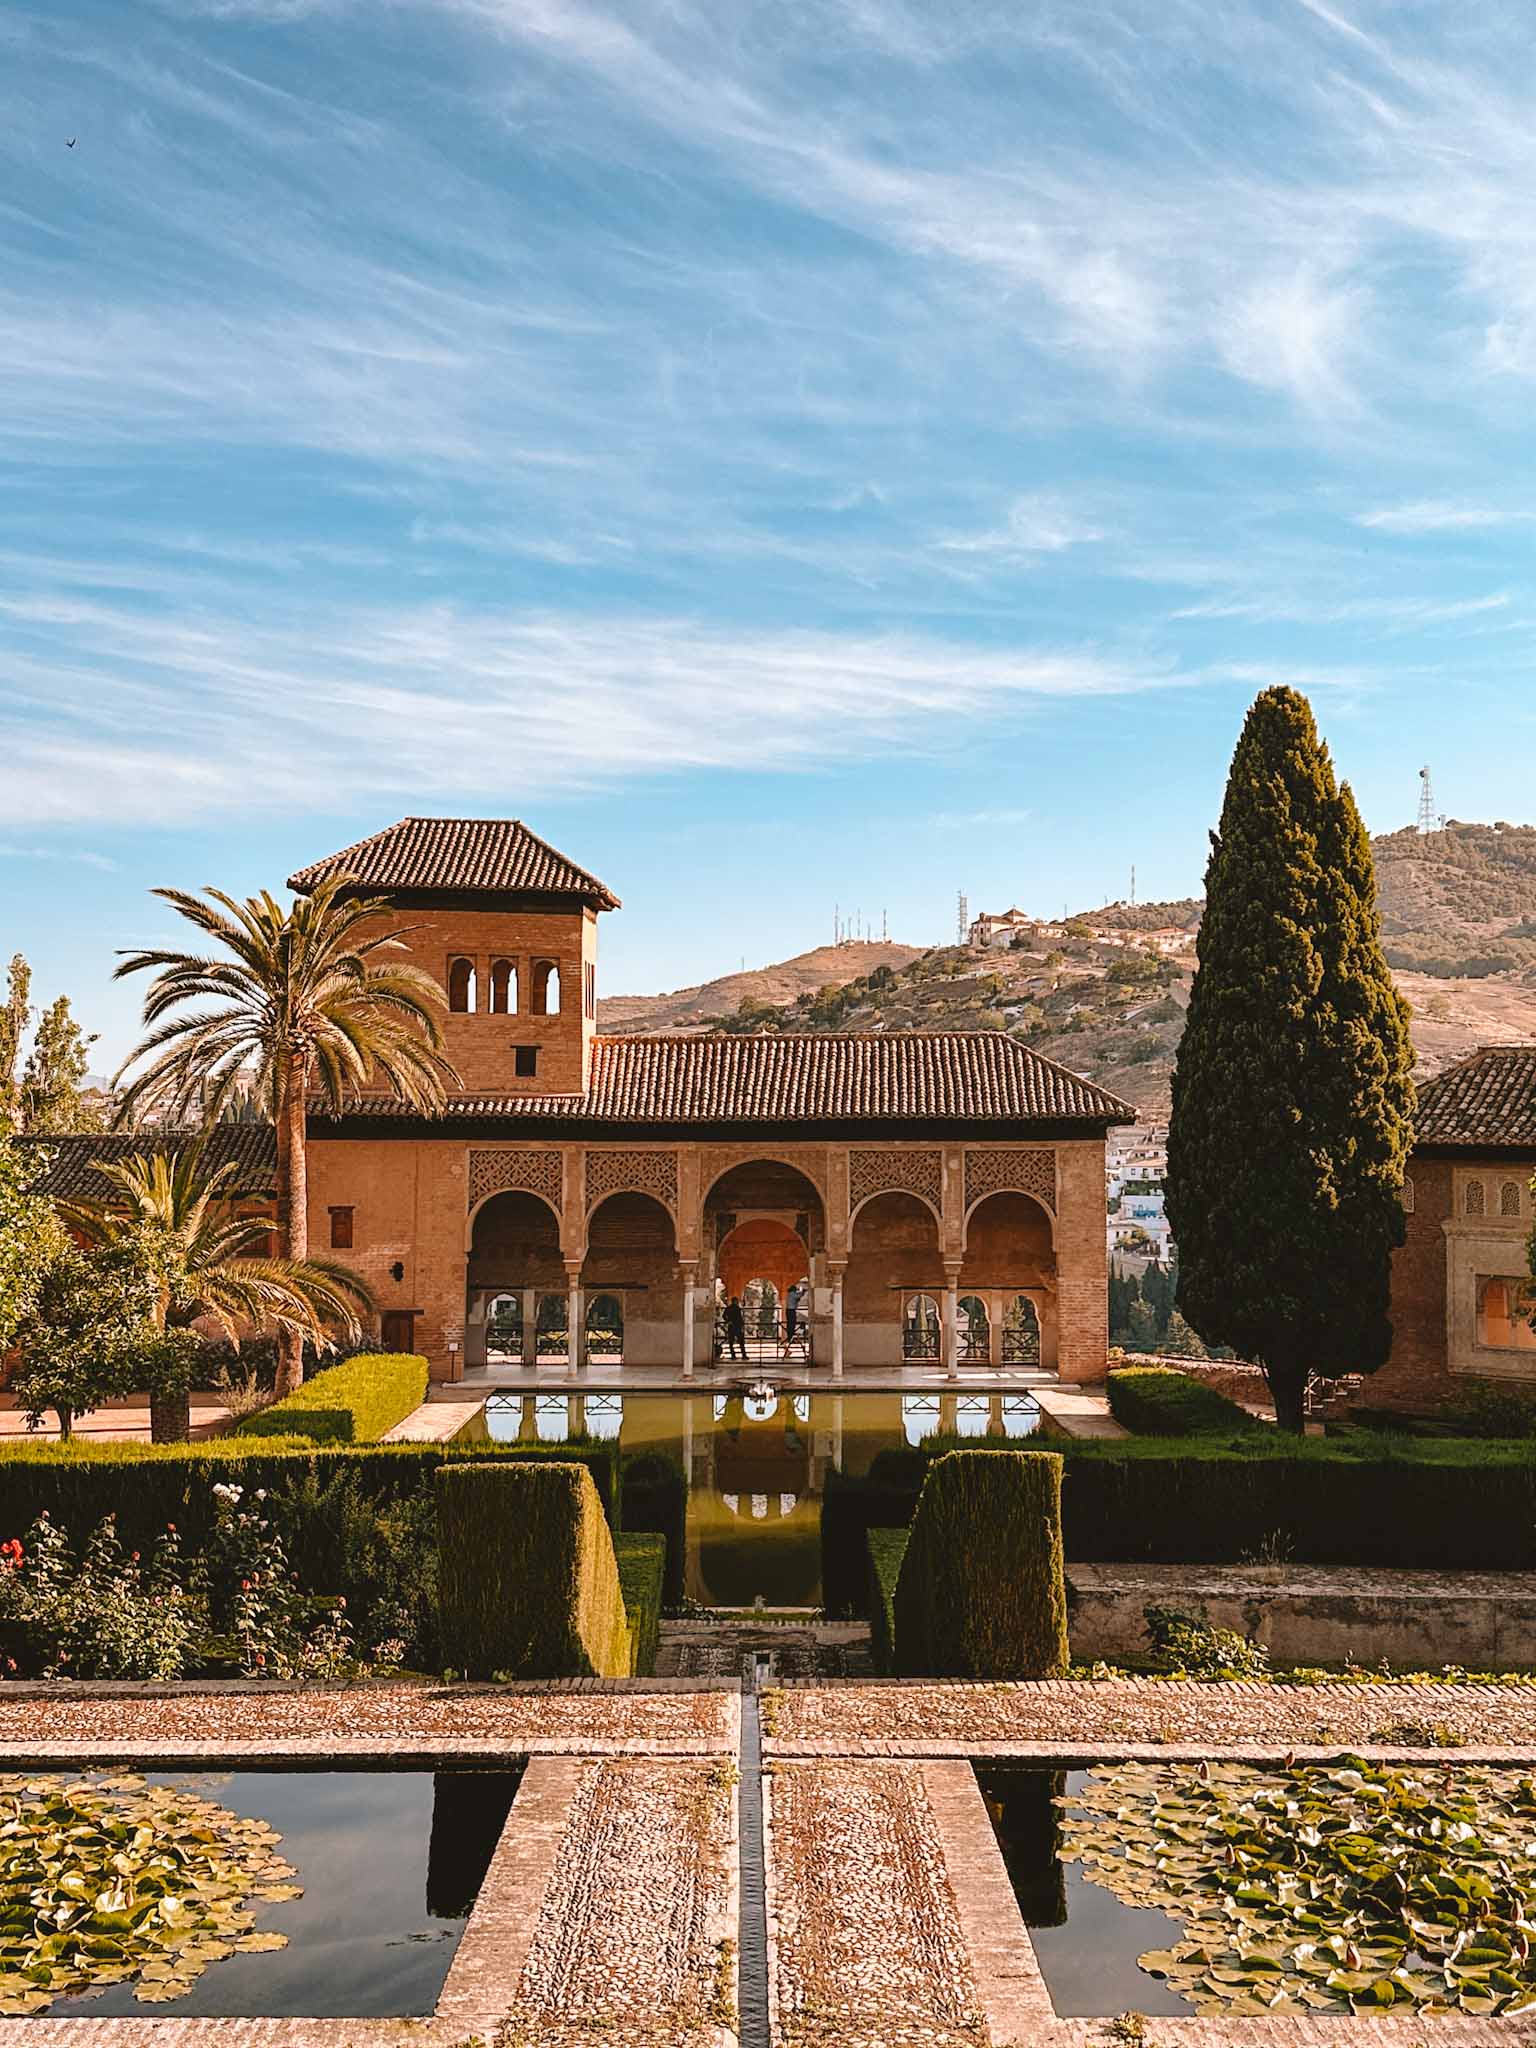 Granada, Spain best things to do in the city at the foothills of the Sierra Nevada mountains